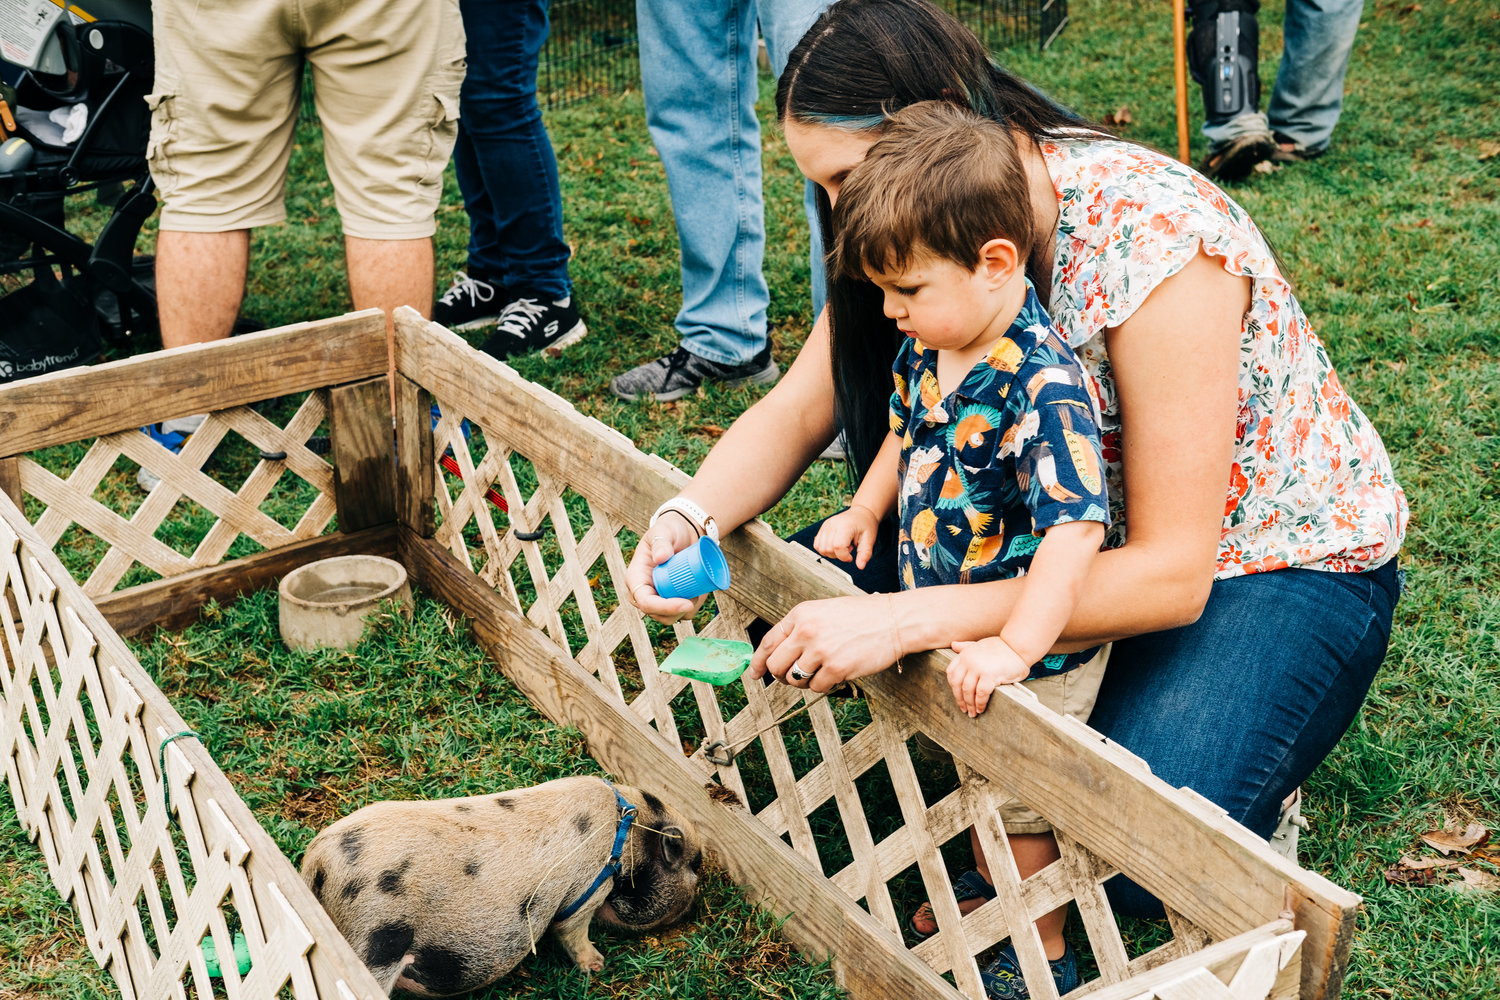 Leopold Houser, 1 1/2, and his mother Rebekah Houser feed a petting zoo pig at Lincoln Park during Little Balkans Days on Saturday.